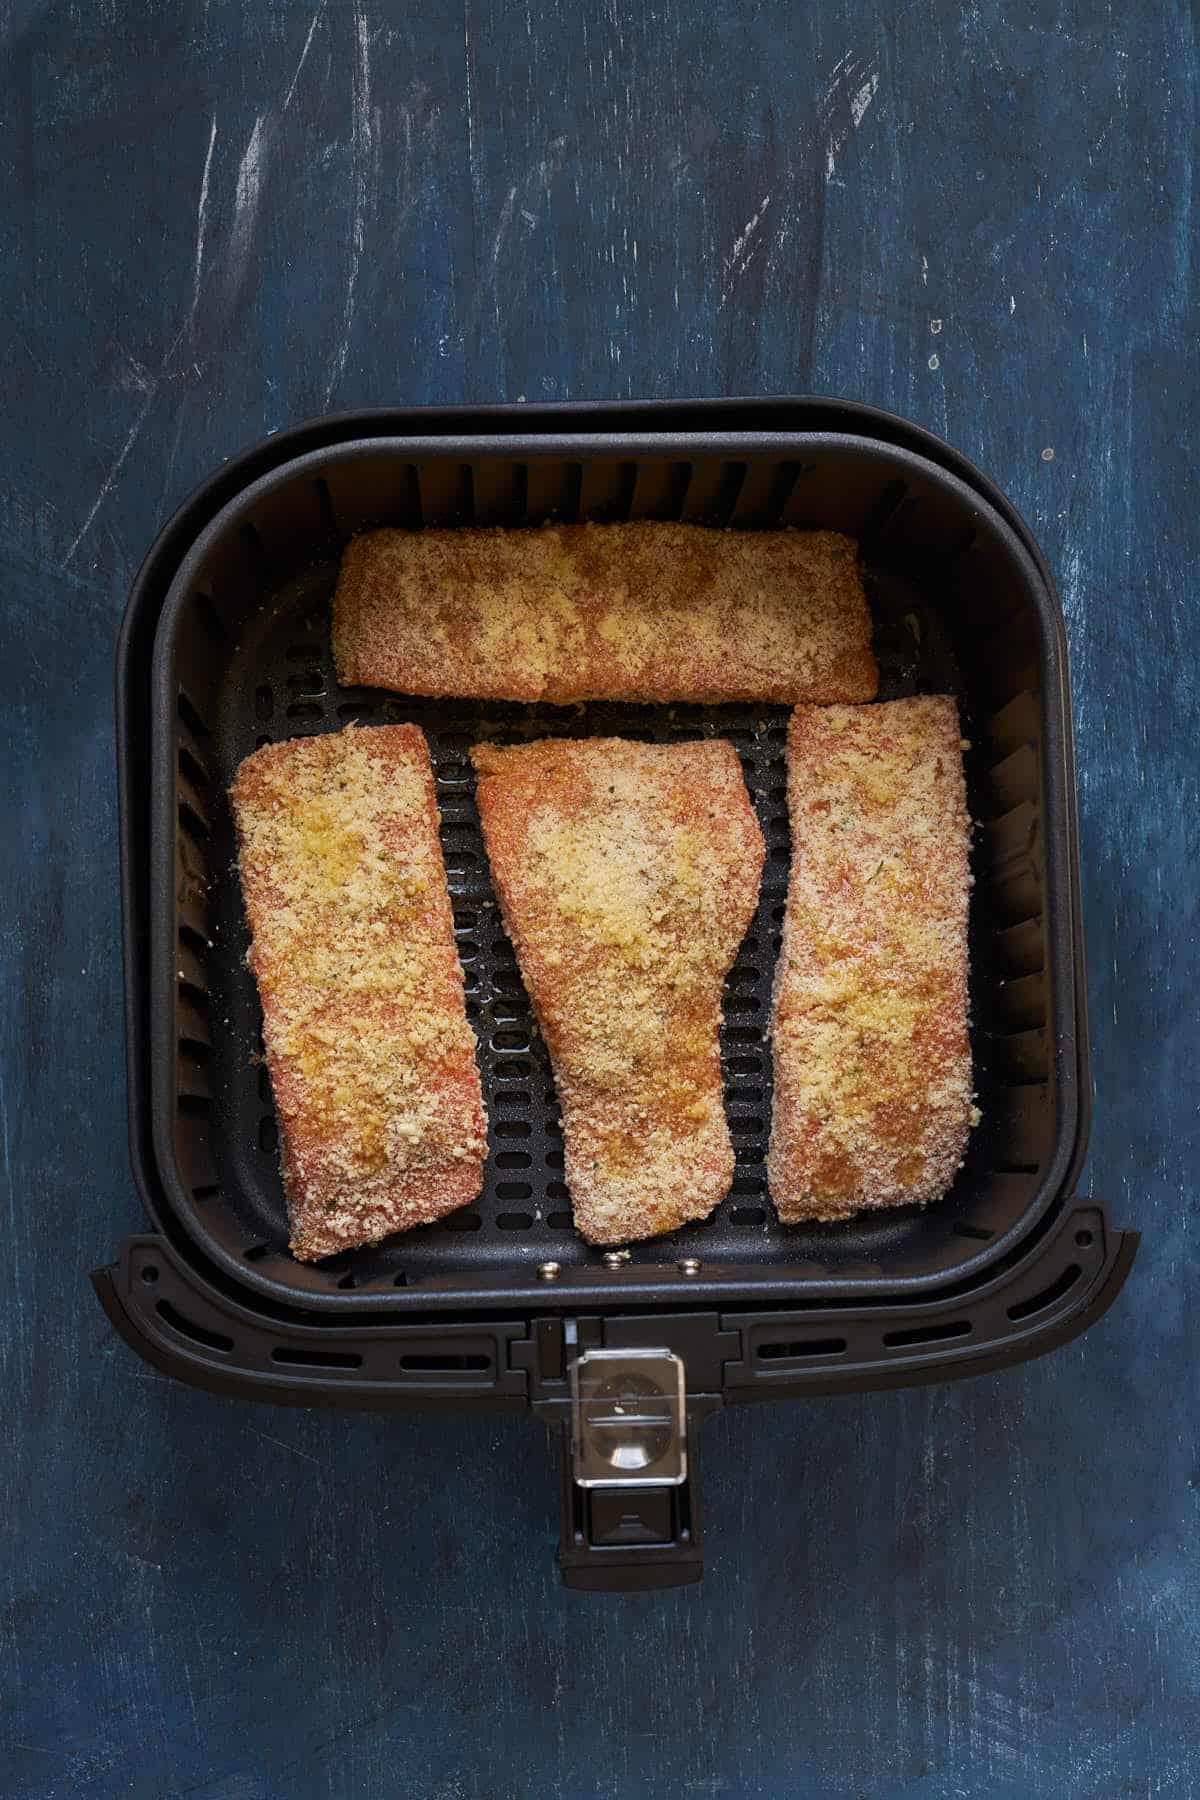 Breaded salmon in the air fryer basket after spraying with oil.